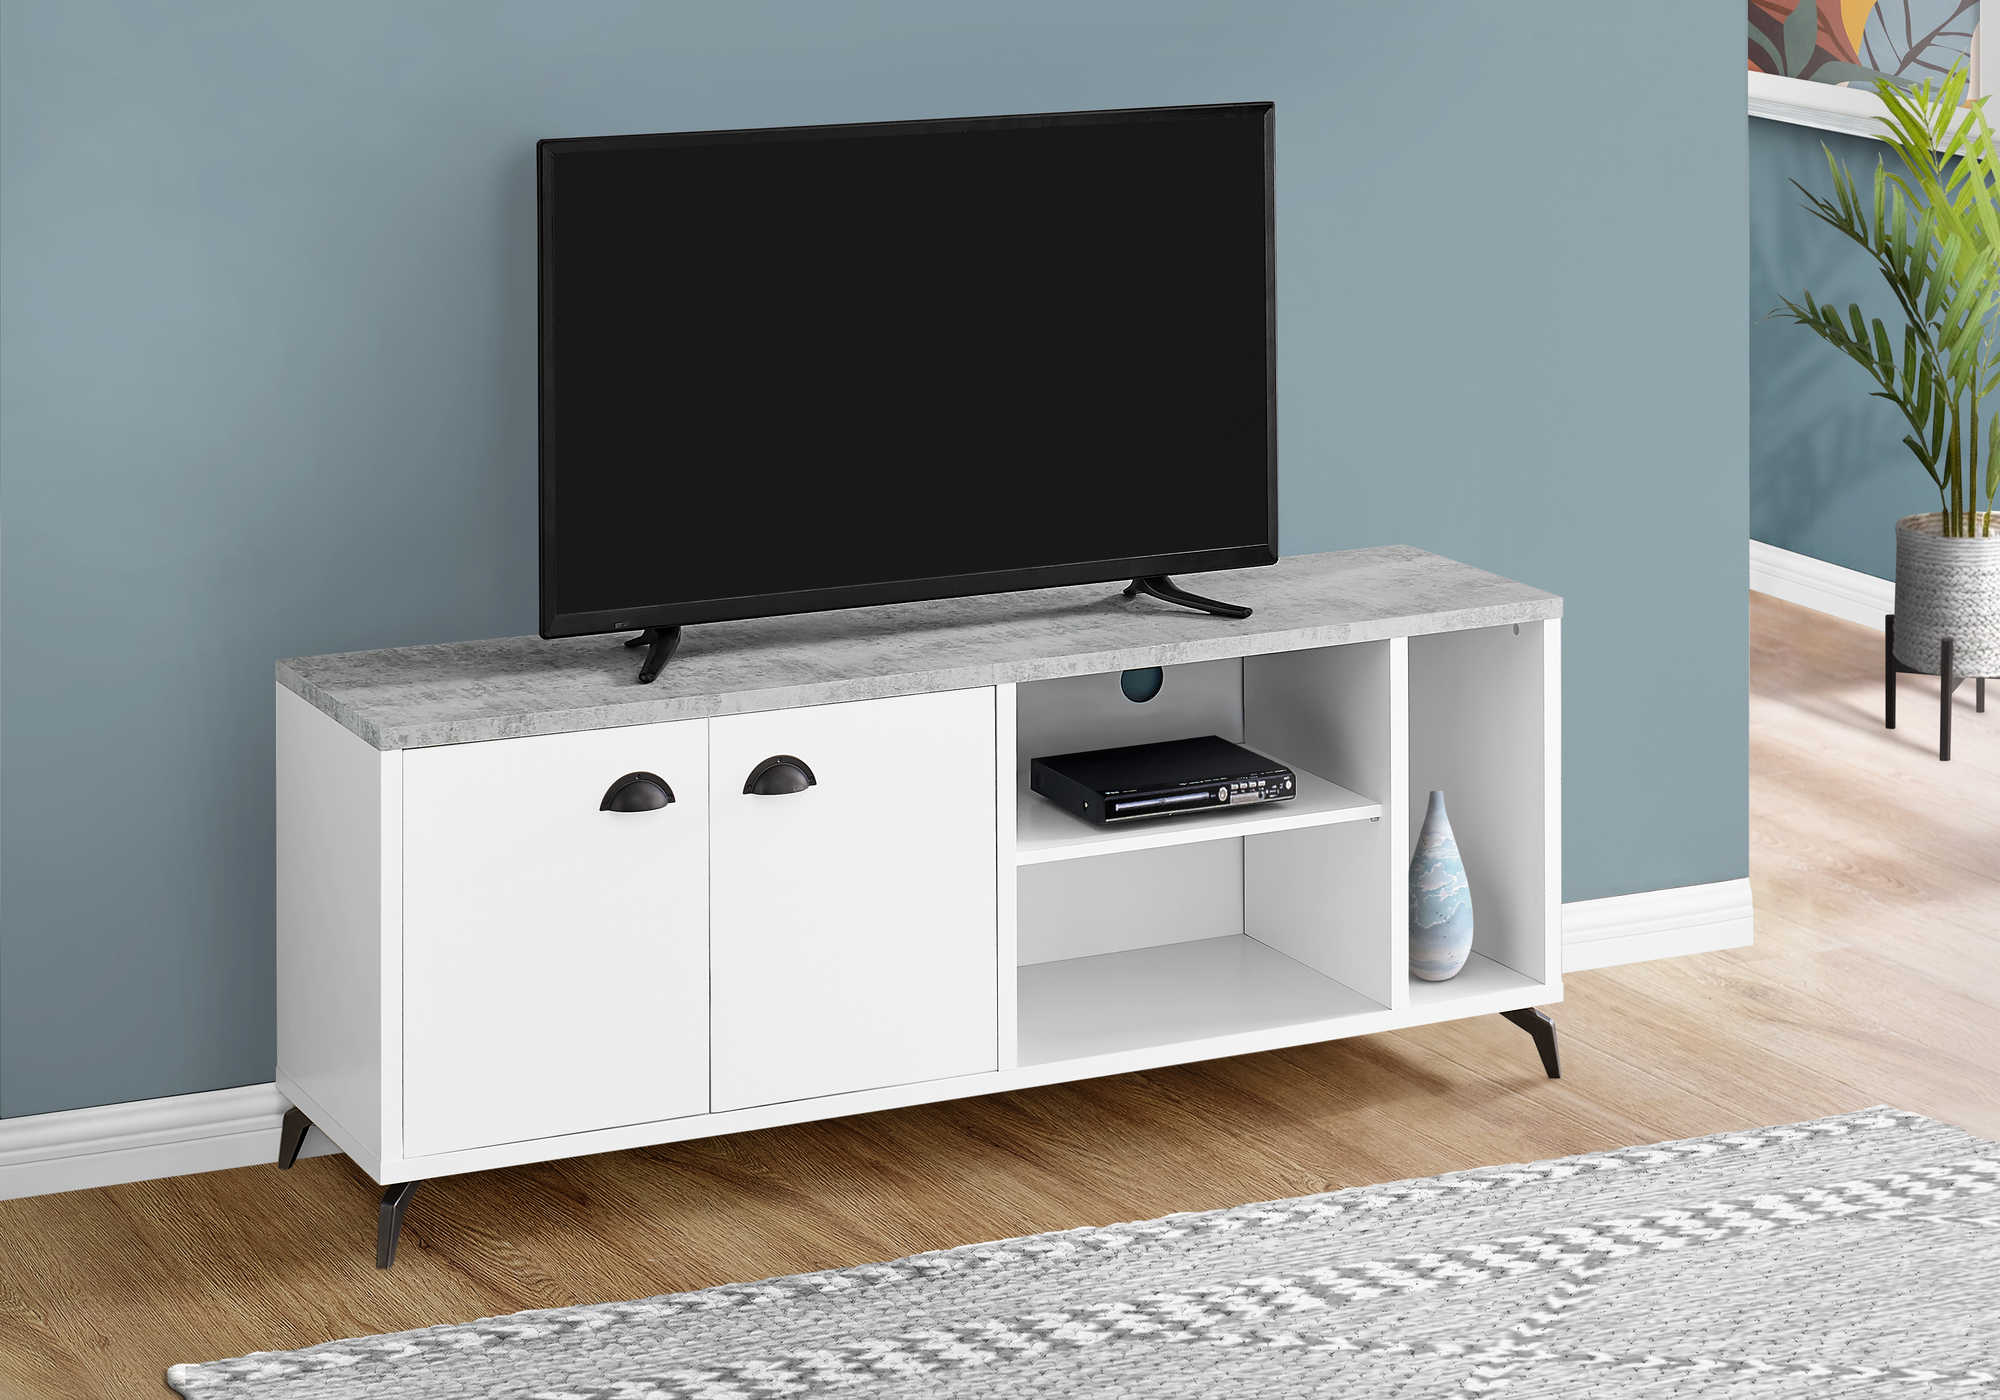 TV STAND - 60"L / WHITE / GREY CEMENT-LOOK TOP